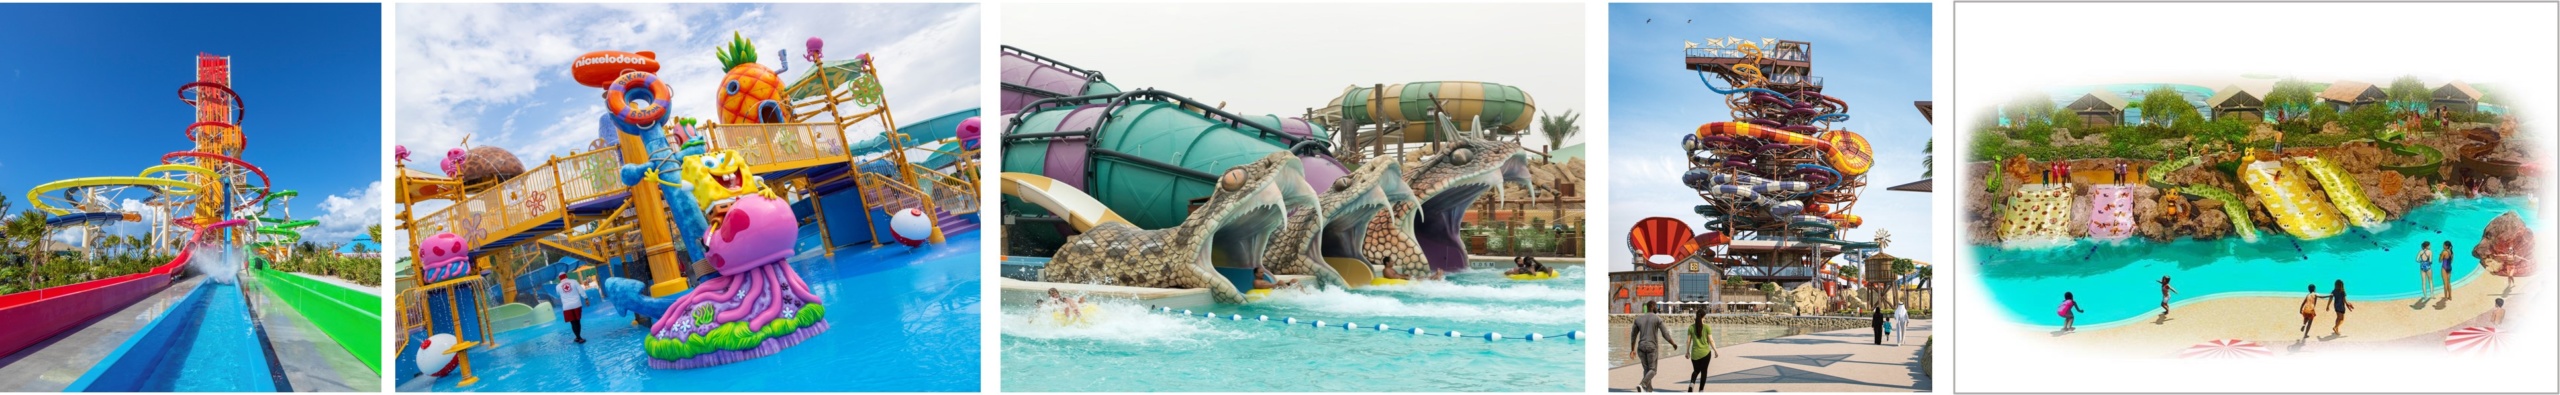 water parks, water slides, aquatic play